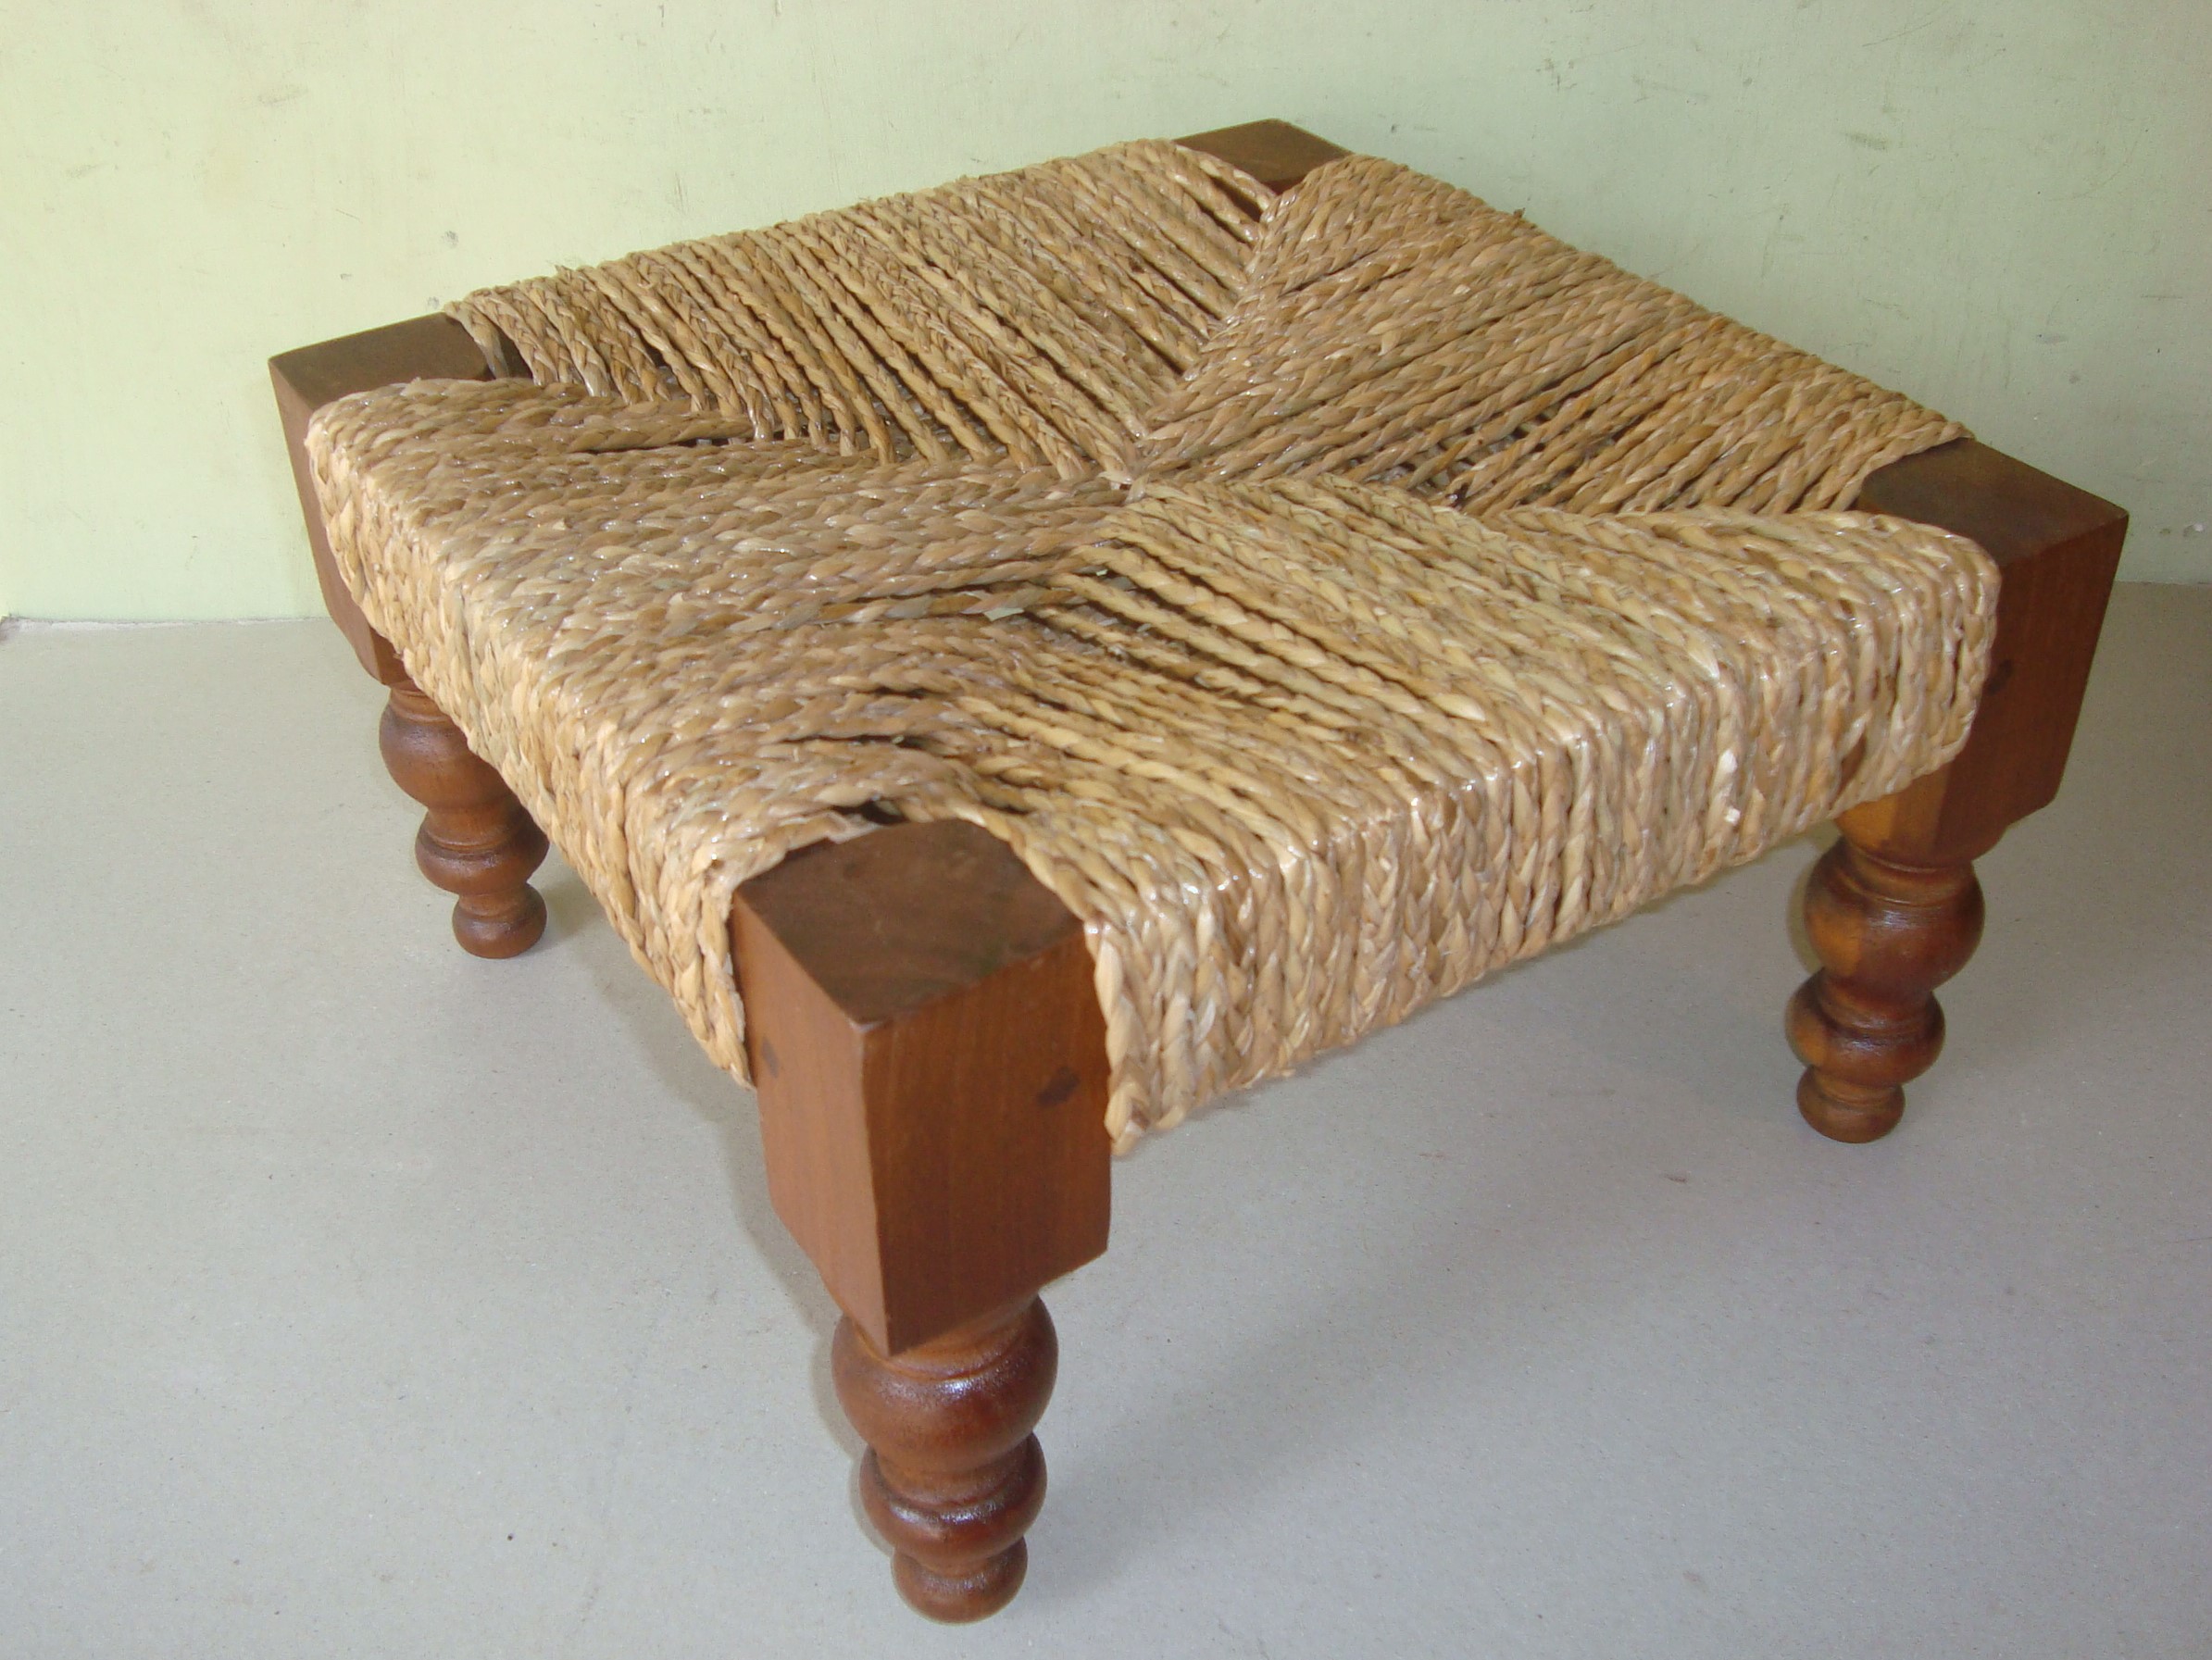 Foot stool made from wood and wicker